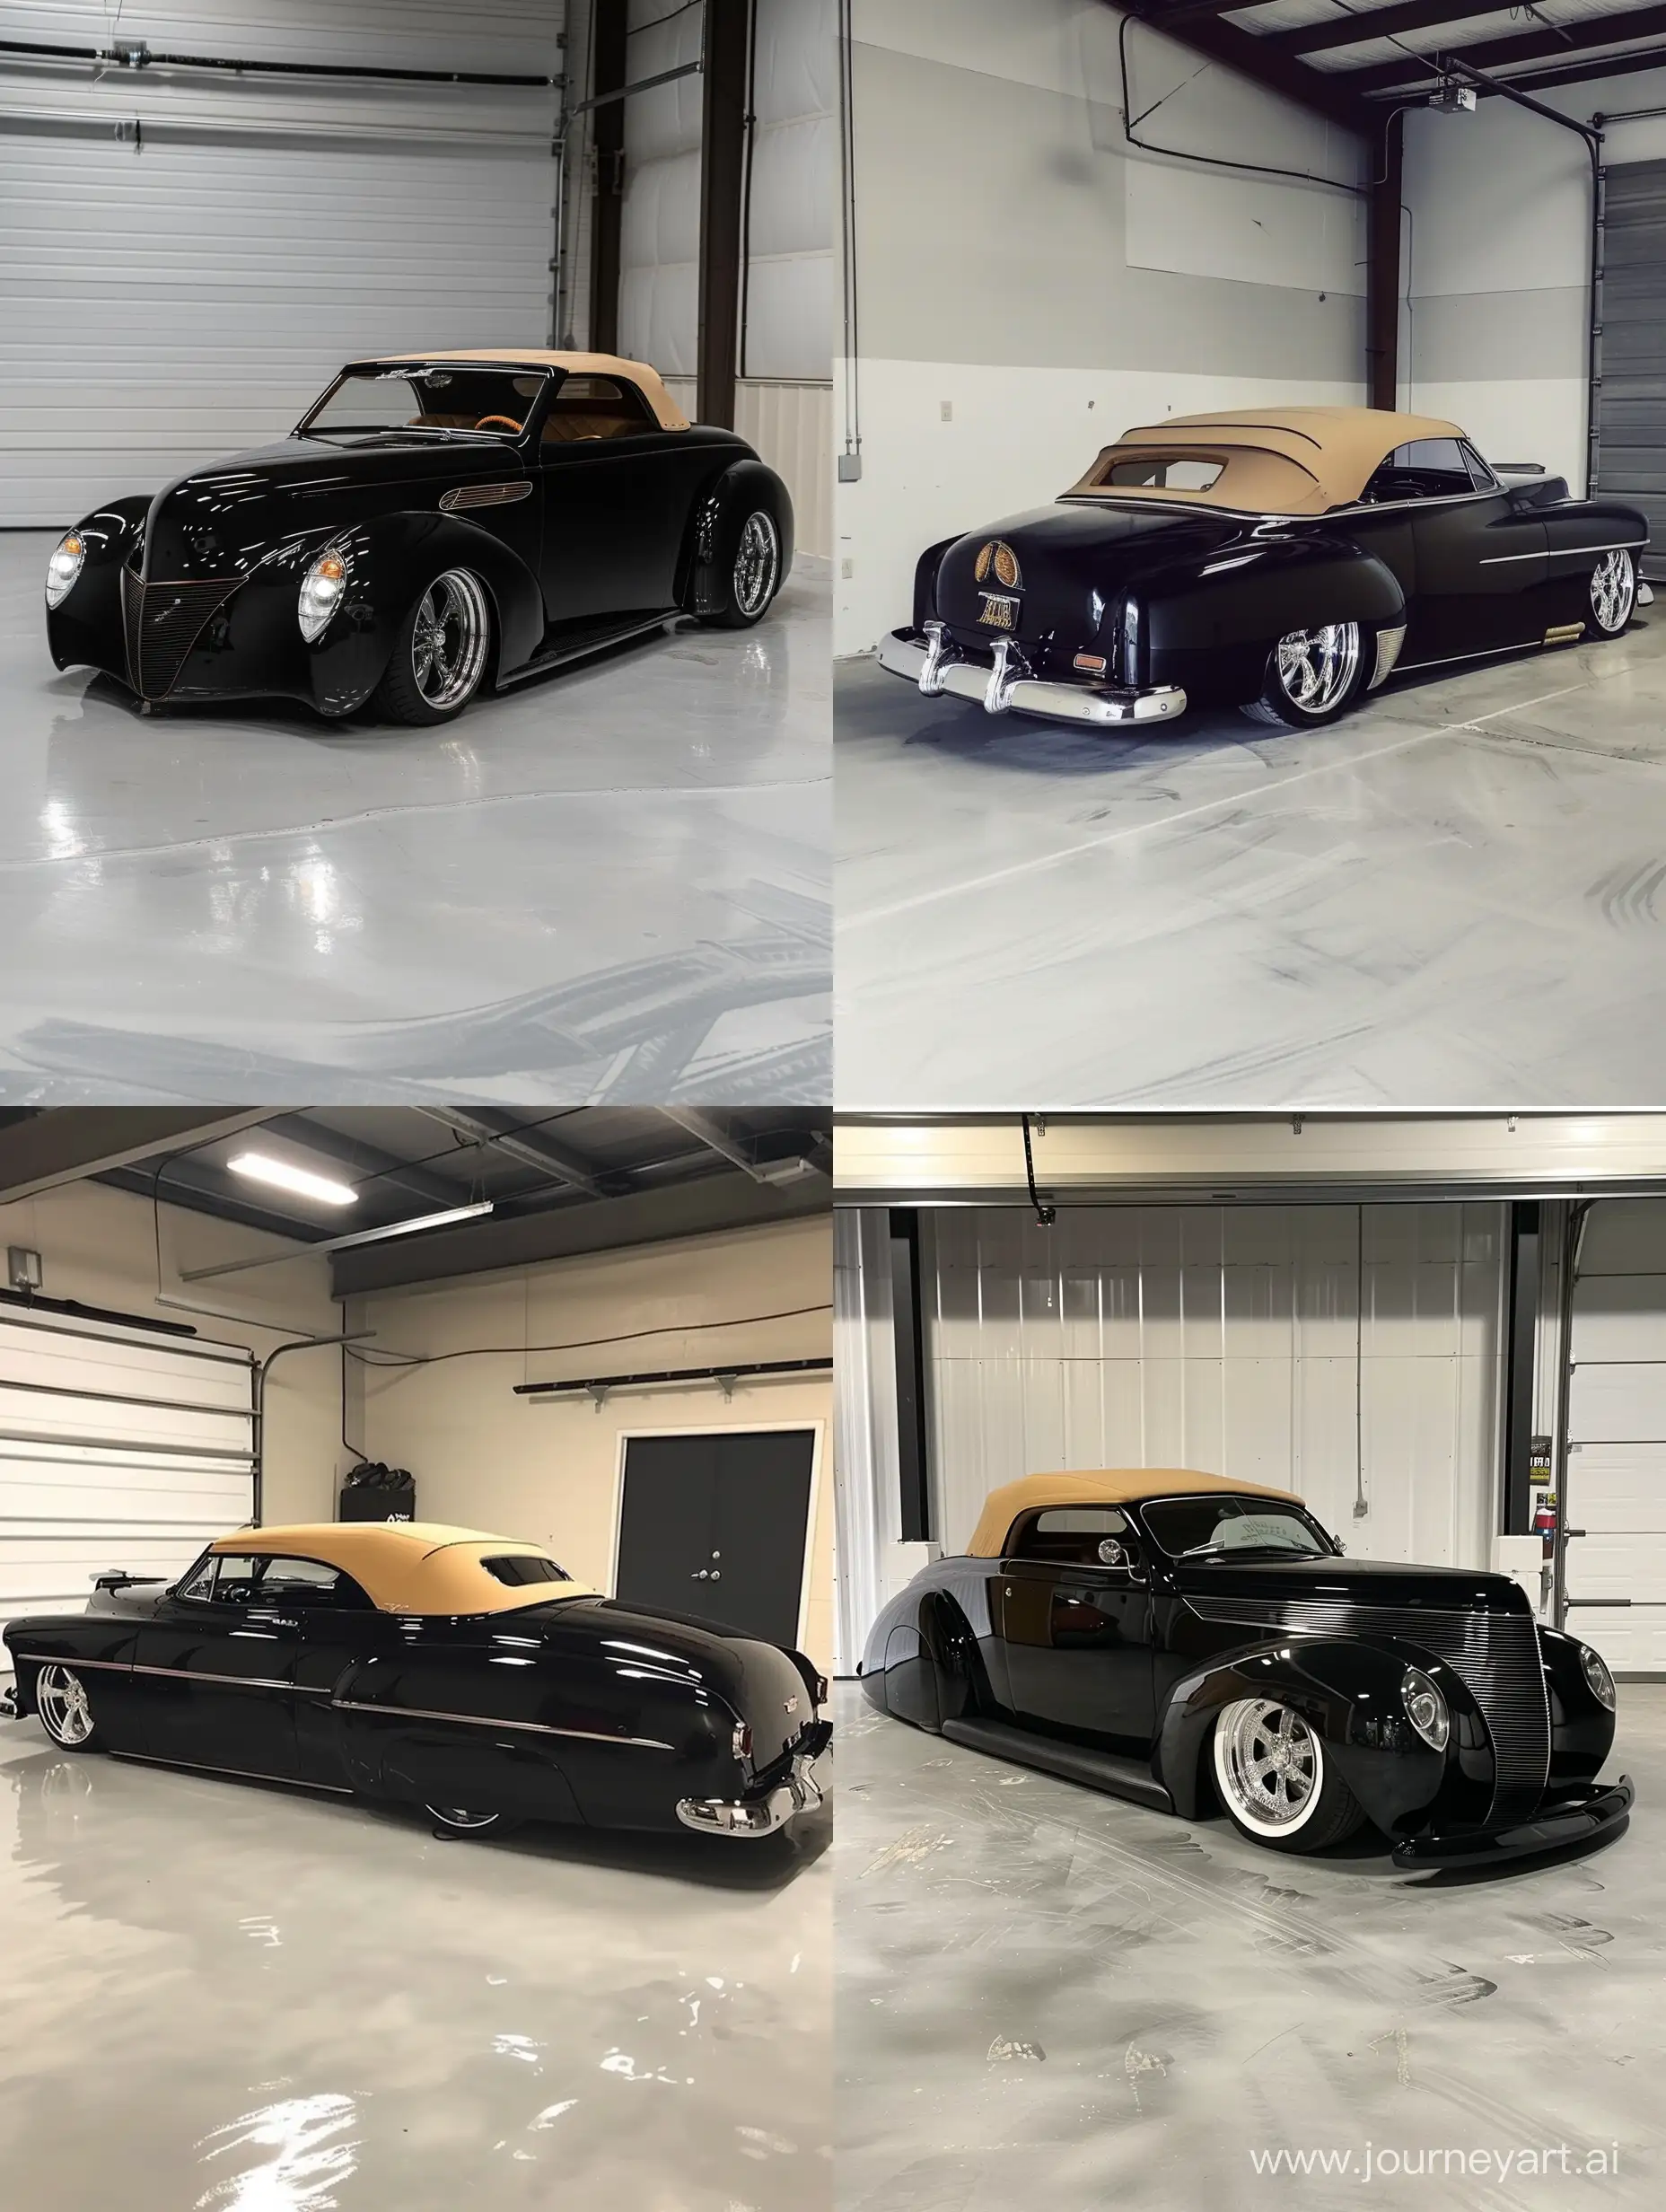 Classic-Black-Car-in-Vintage-Garage-with-Tan-Top